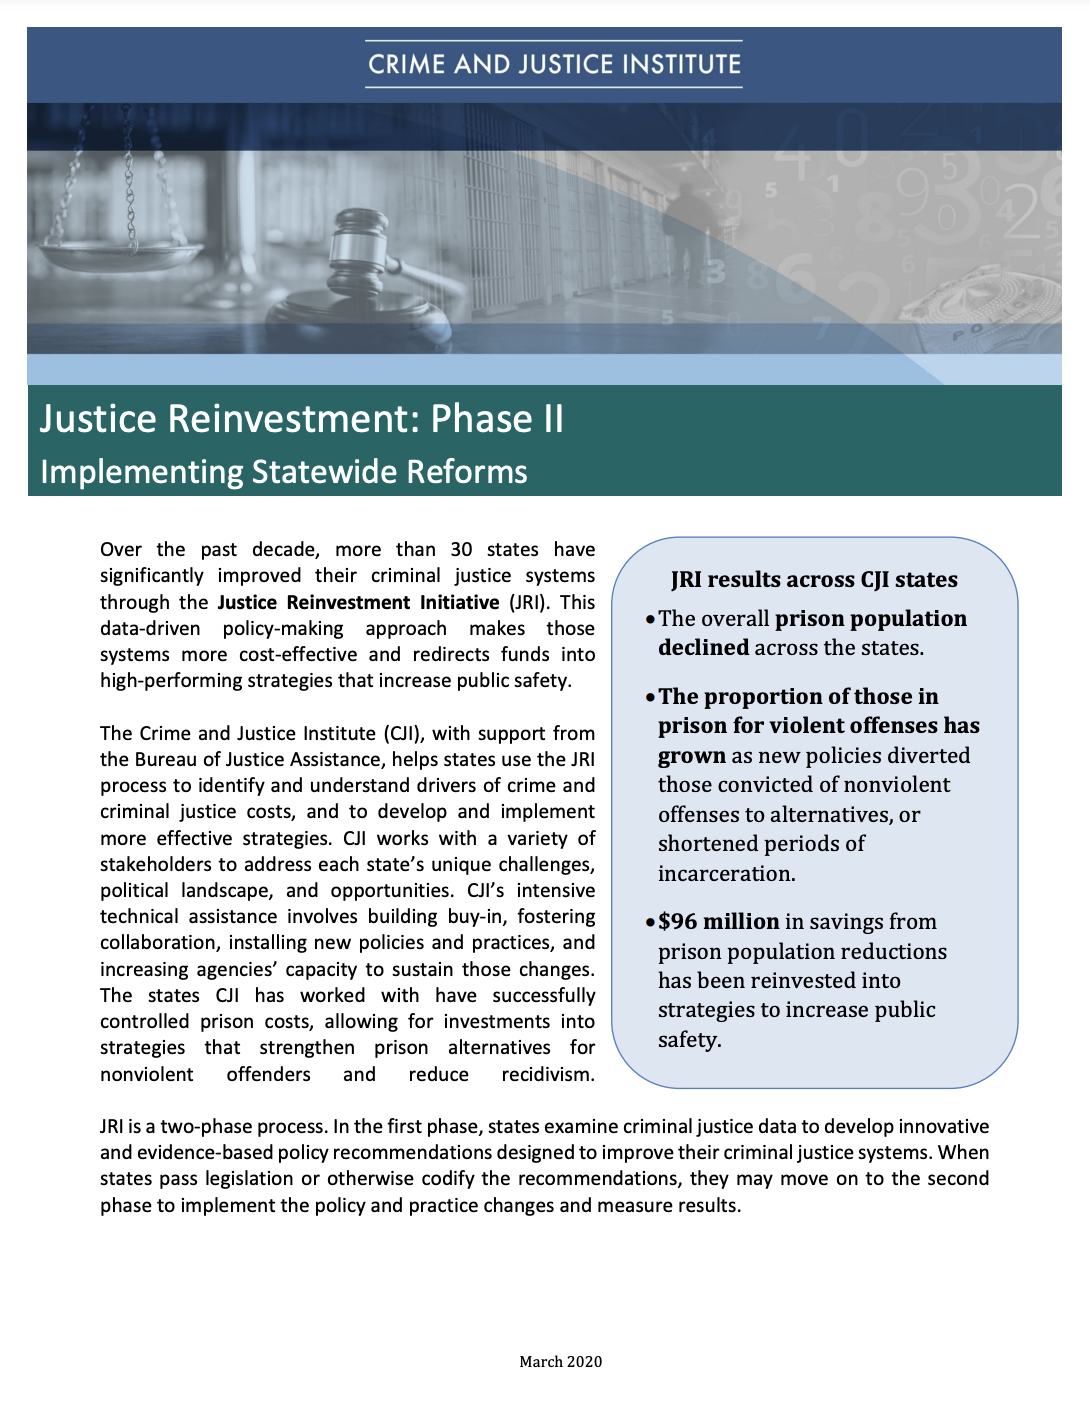 Justice Reinvestment: Phase II Implementing Statewide Reforms